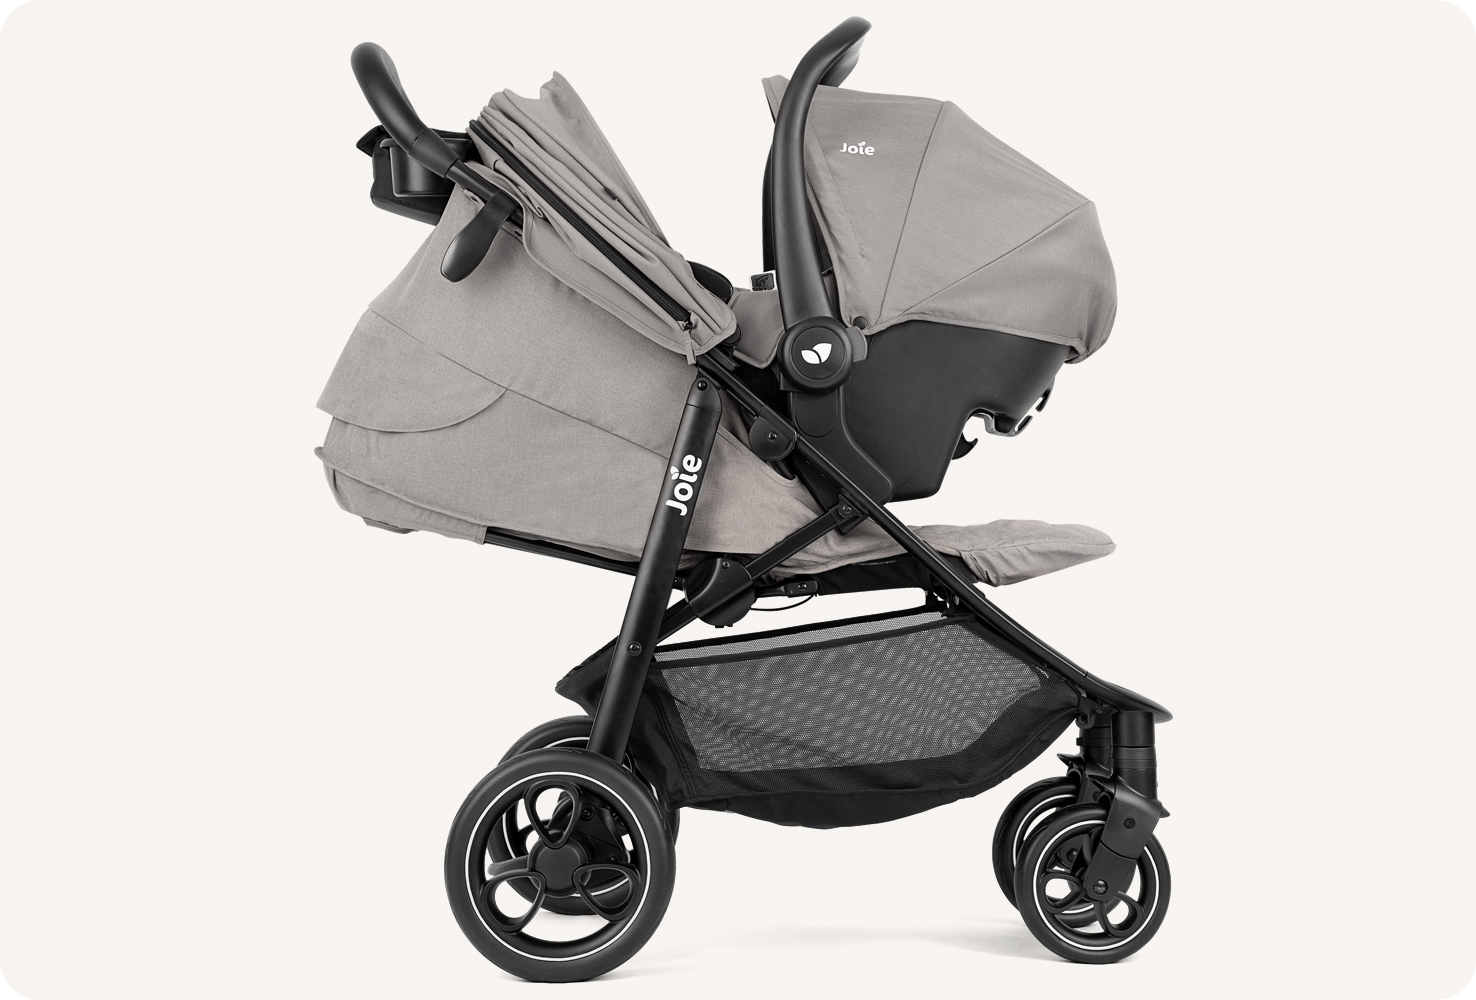  Joie litetrax pro stroller in gray facing right with infant carrier attached. 